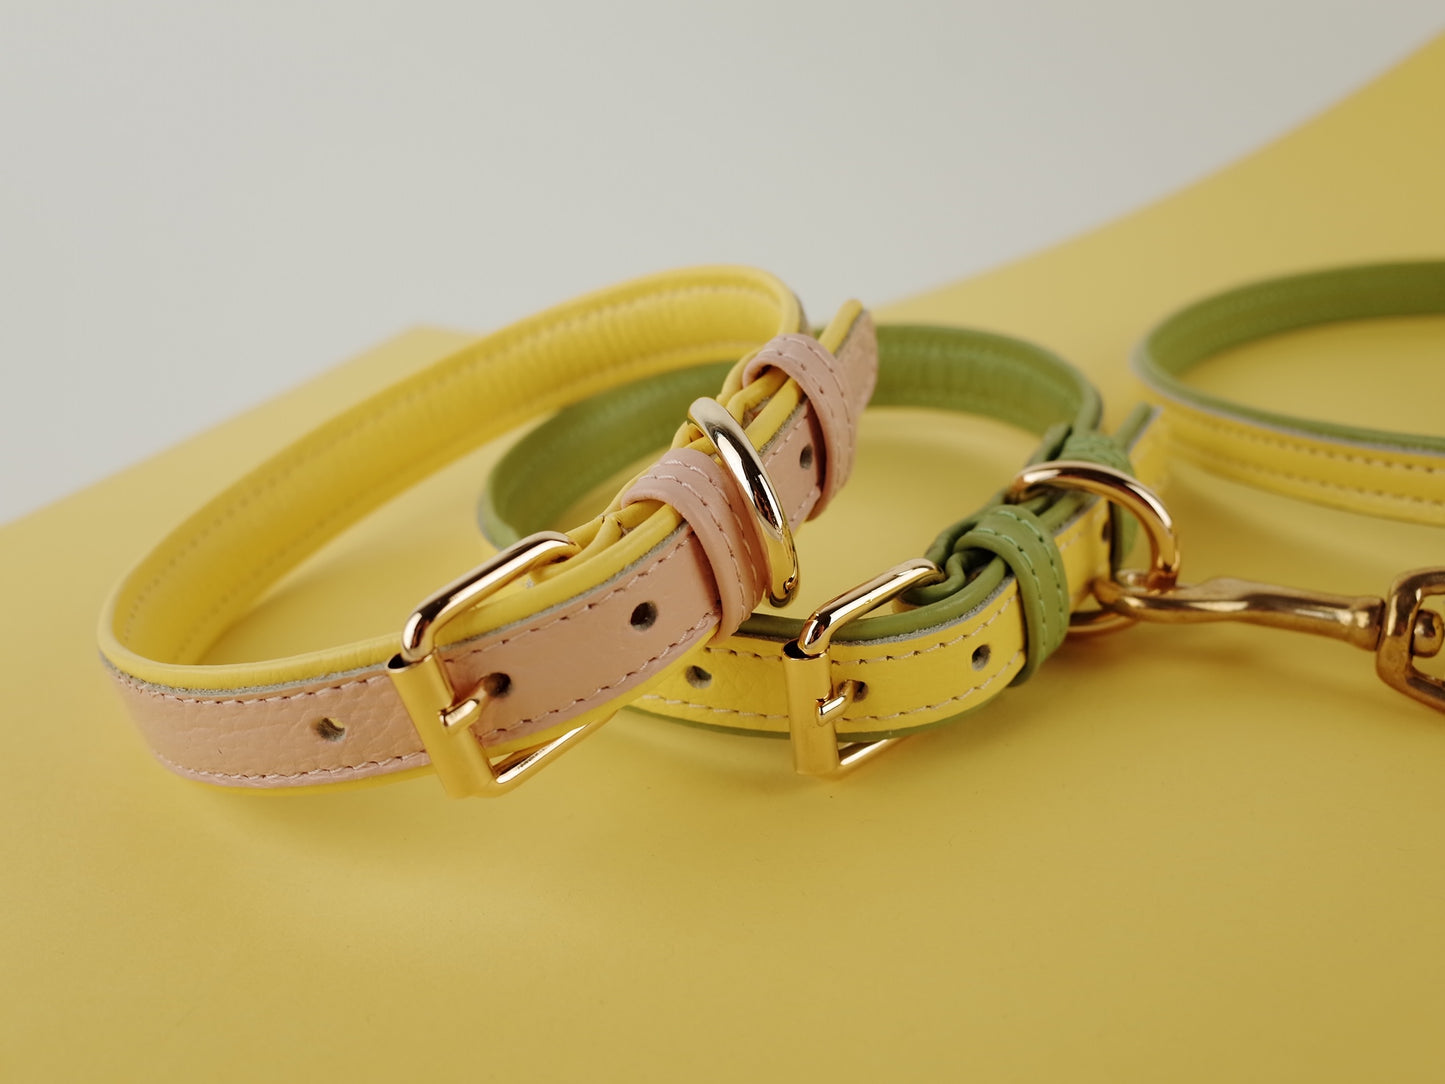 Willow Walks leather collar in two tone pink and yellow